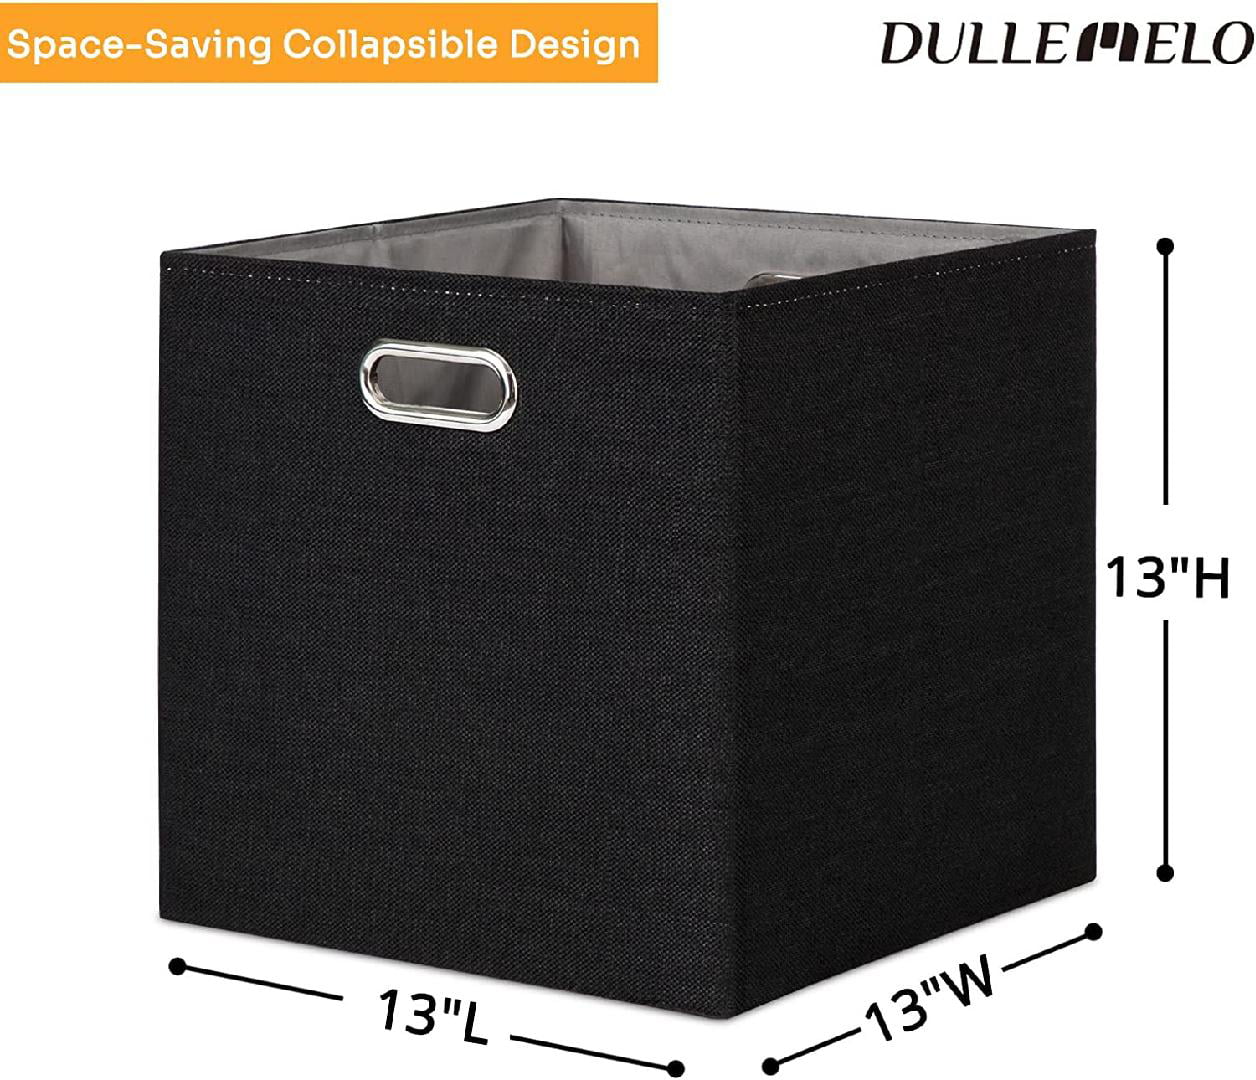 Rebrilliant Navy Linen Cube Organizer Shelf with 4 Storage Bins – Strong Durable Foldable Shelf – Kid Toy Clothes Towels Cubby – Collapsible Bedroom F